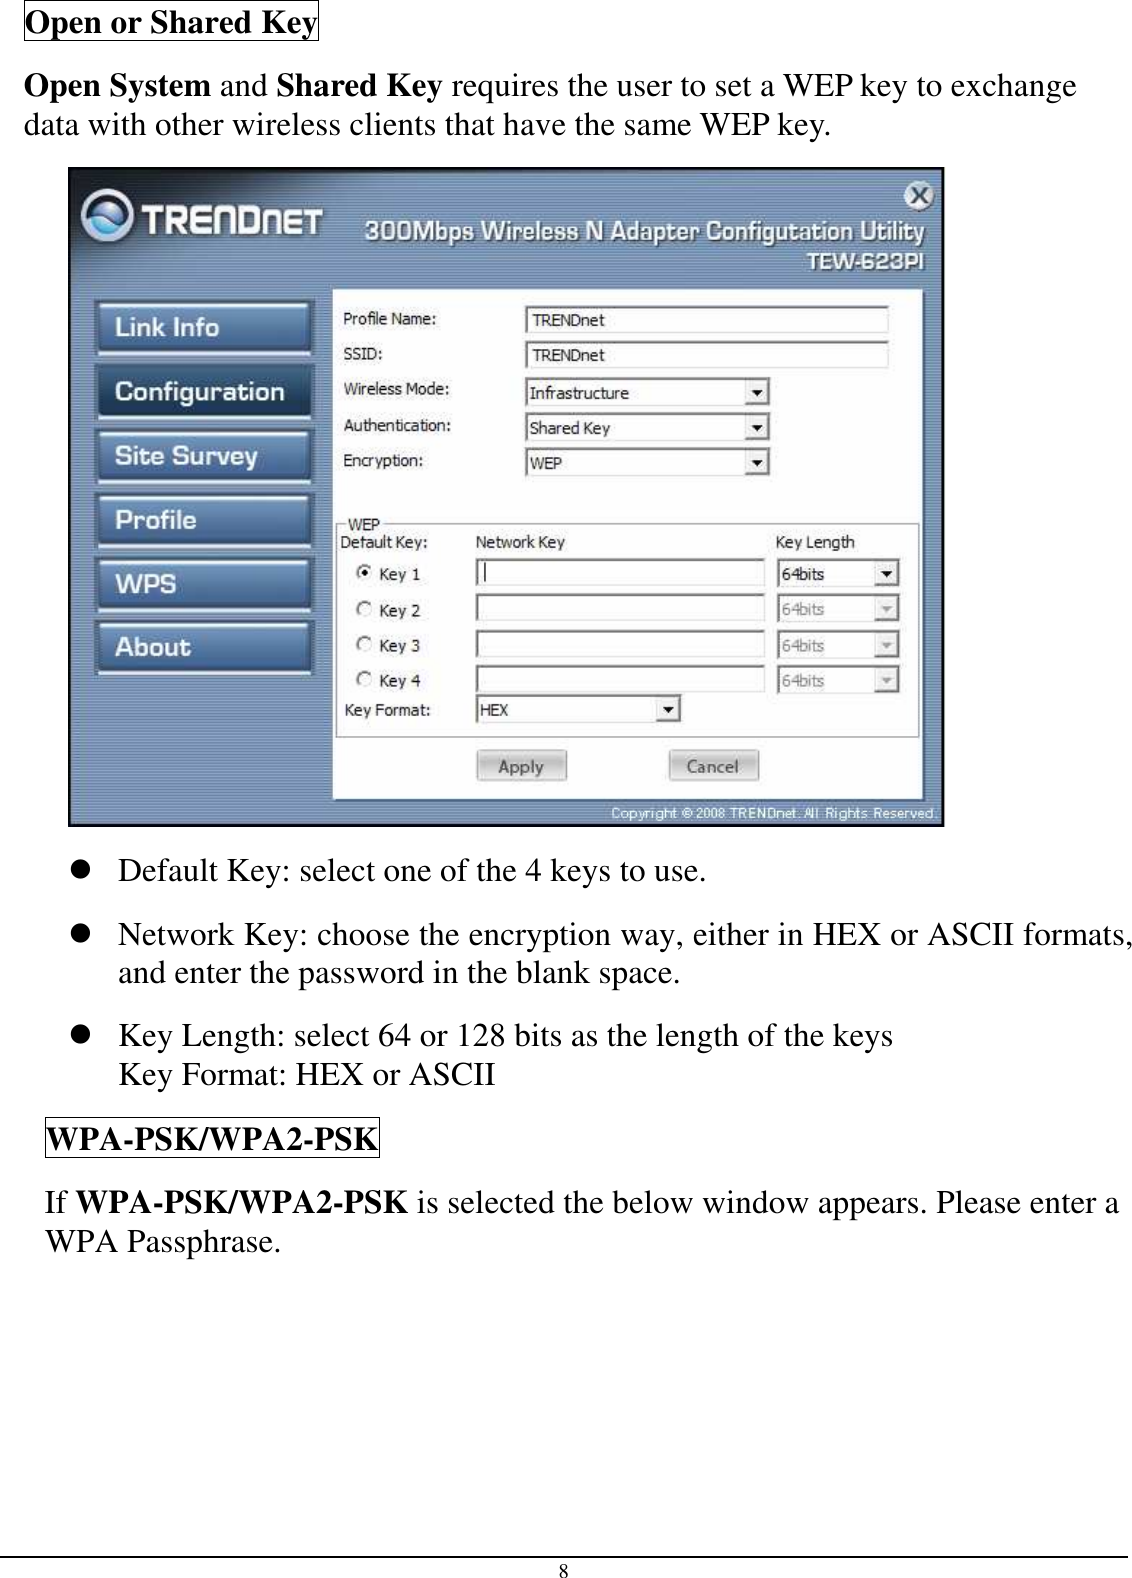 8 Open or Shared Key Open System and Shared Key requires the user to set a WEP key to exchange data with other wireless clients that have the same WEP key.   Default Key: select one of the 4 keys to use.  Network Key: choose the encryption way, either in HEX or ASCII formats, and enter the password in the blank space.   Key Length: select 64 or 128 bits as the length of the keys Key Format: HEX or ASCII WPA-PSK/WPA2-PSK If WPA-PSK/WPA2-PSK is selected the below window appears. Please enter a WPA Passphrase. 